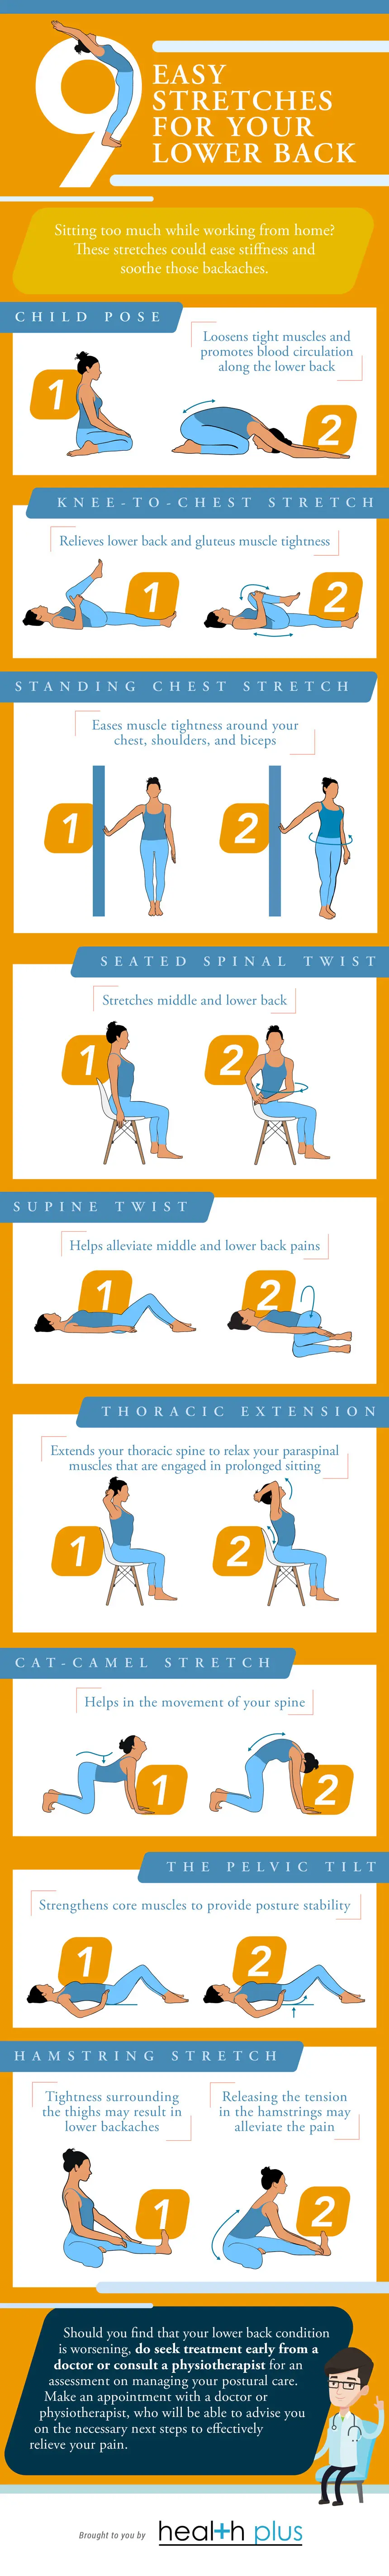 Easy-lower-back-stretches-ig-d